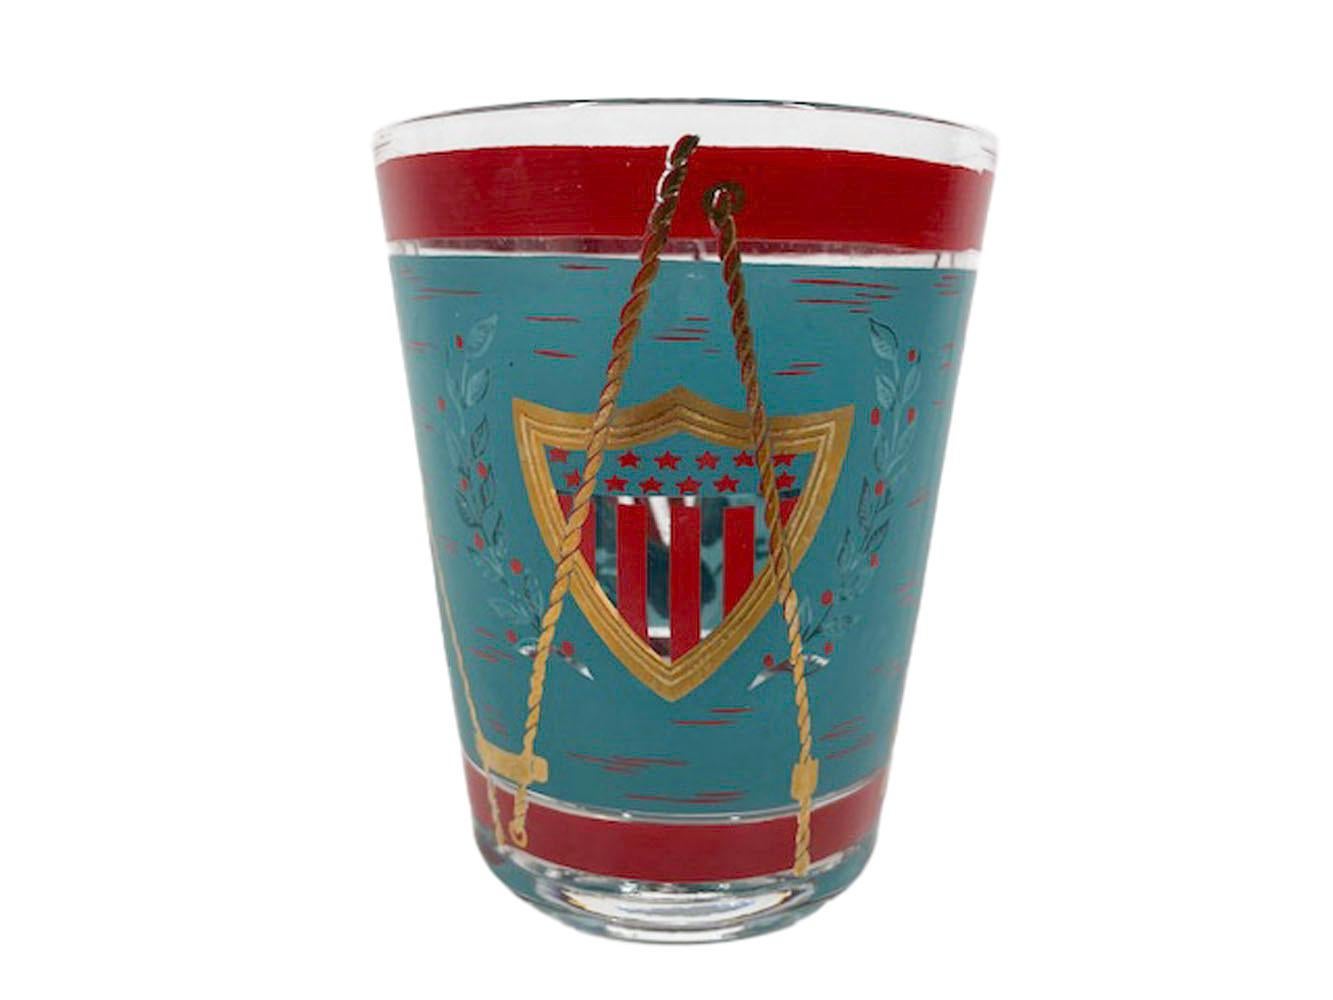 Vintage Cera Patriotic Drum Rocks Glasses in Teal & Red Enamel with 22k Gold In Good Condition For Sale In Nantucket, MA